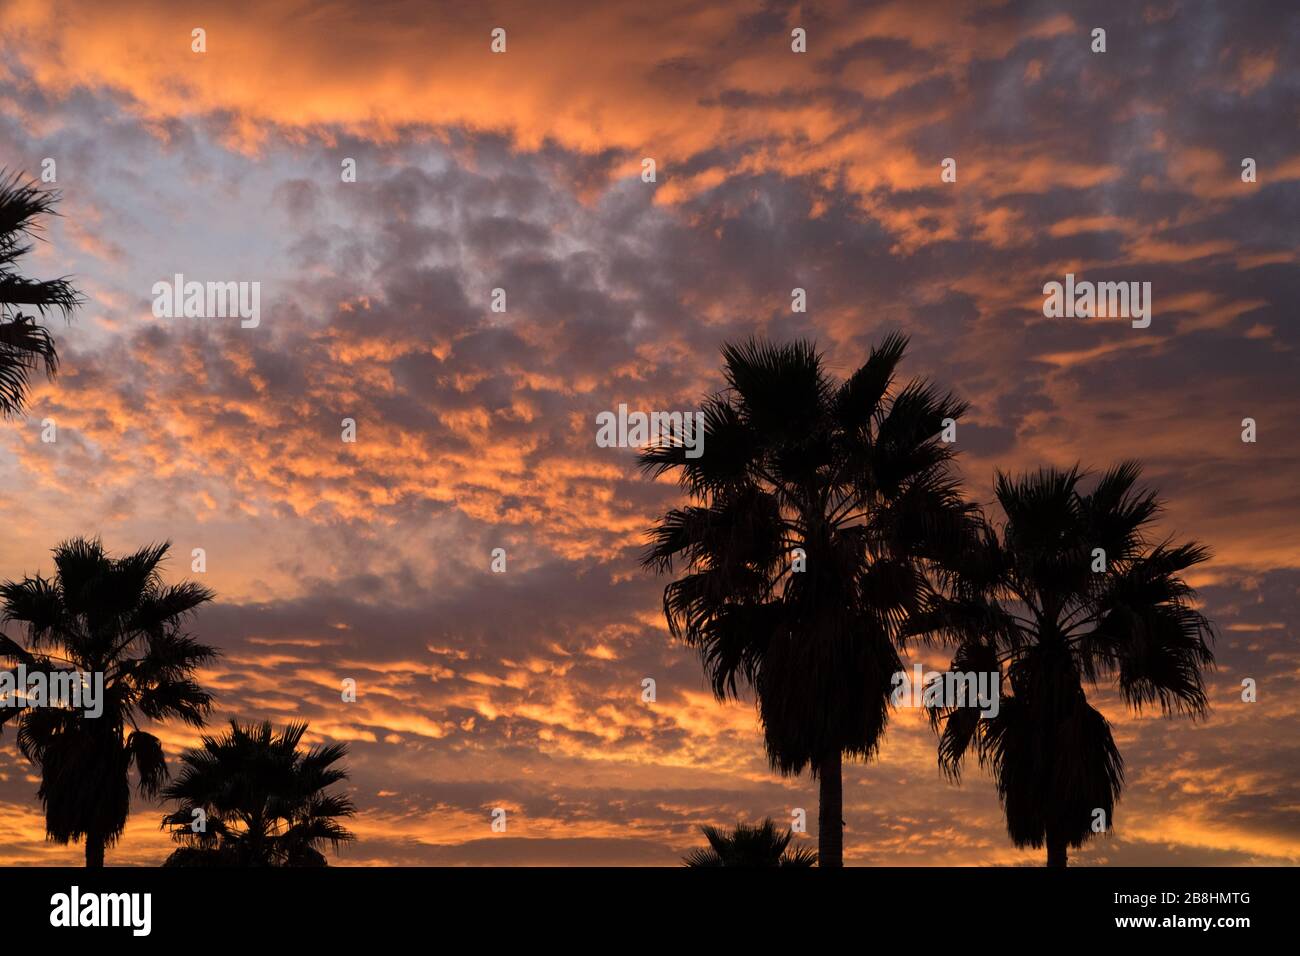 Silhouettes of palm trees against a colourful sunset sky with orange light in the clouds Stock Photo